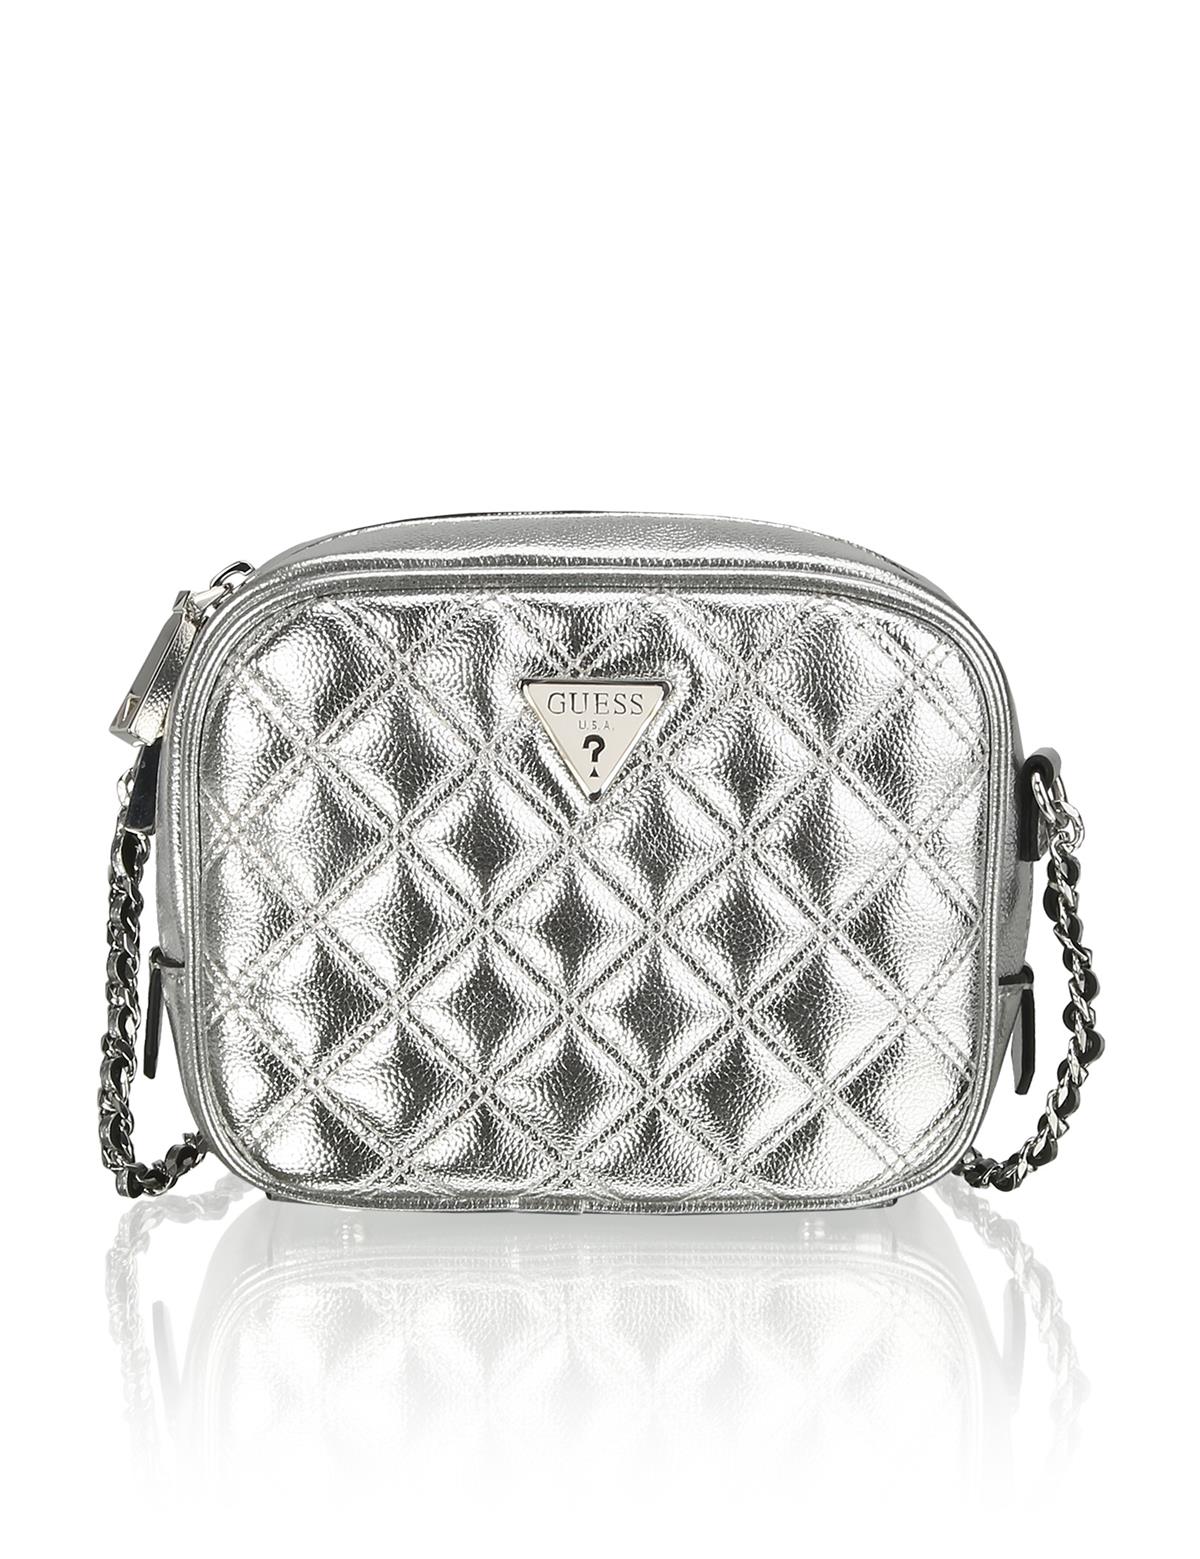 HUMANIC 30 Guess Quilted Bag EUR 99,95 6131402474